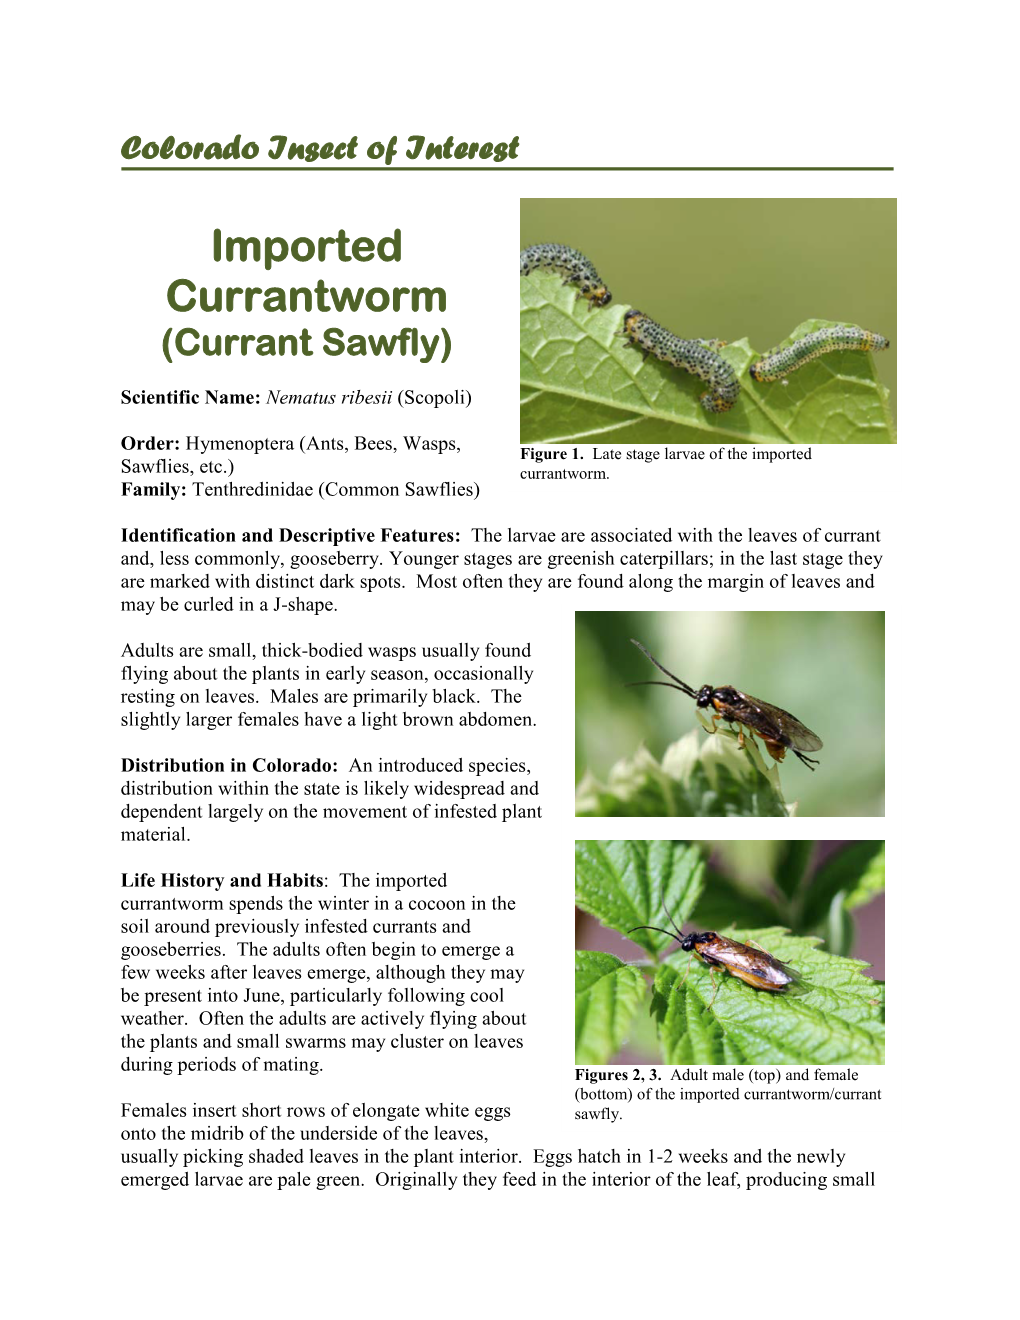 Imported Currantworm (Currant Sawfly)